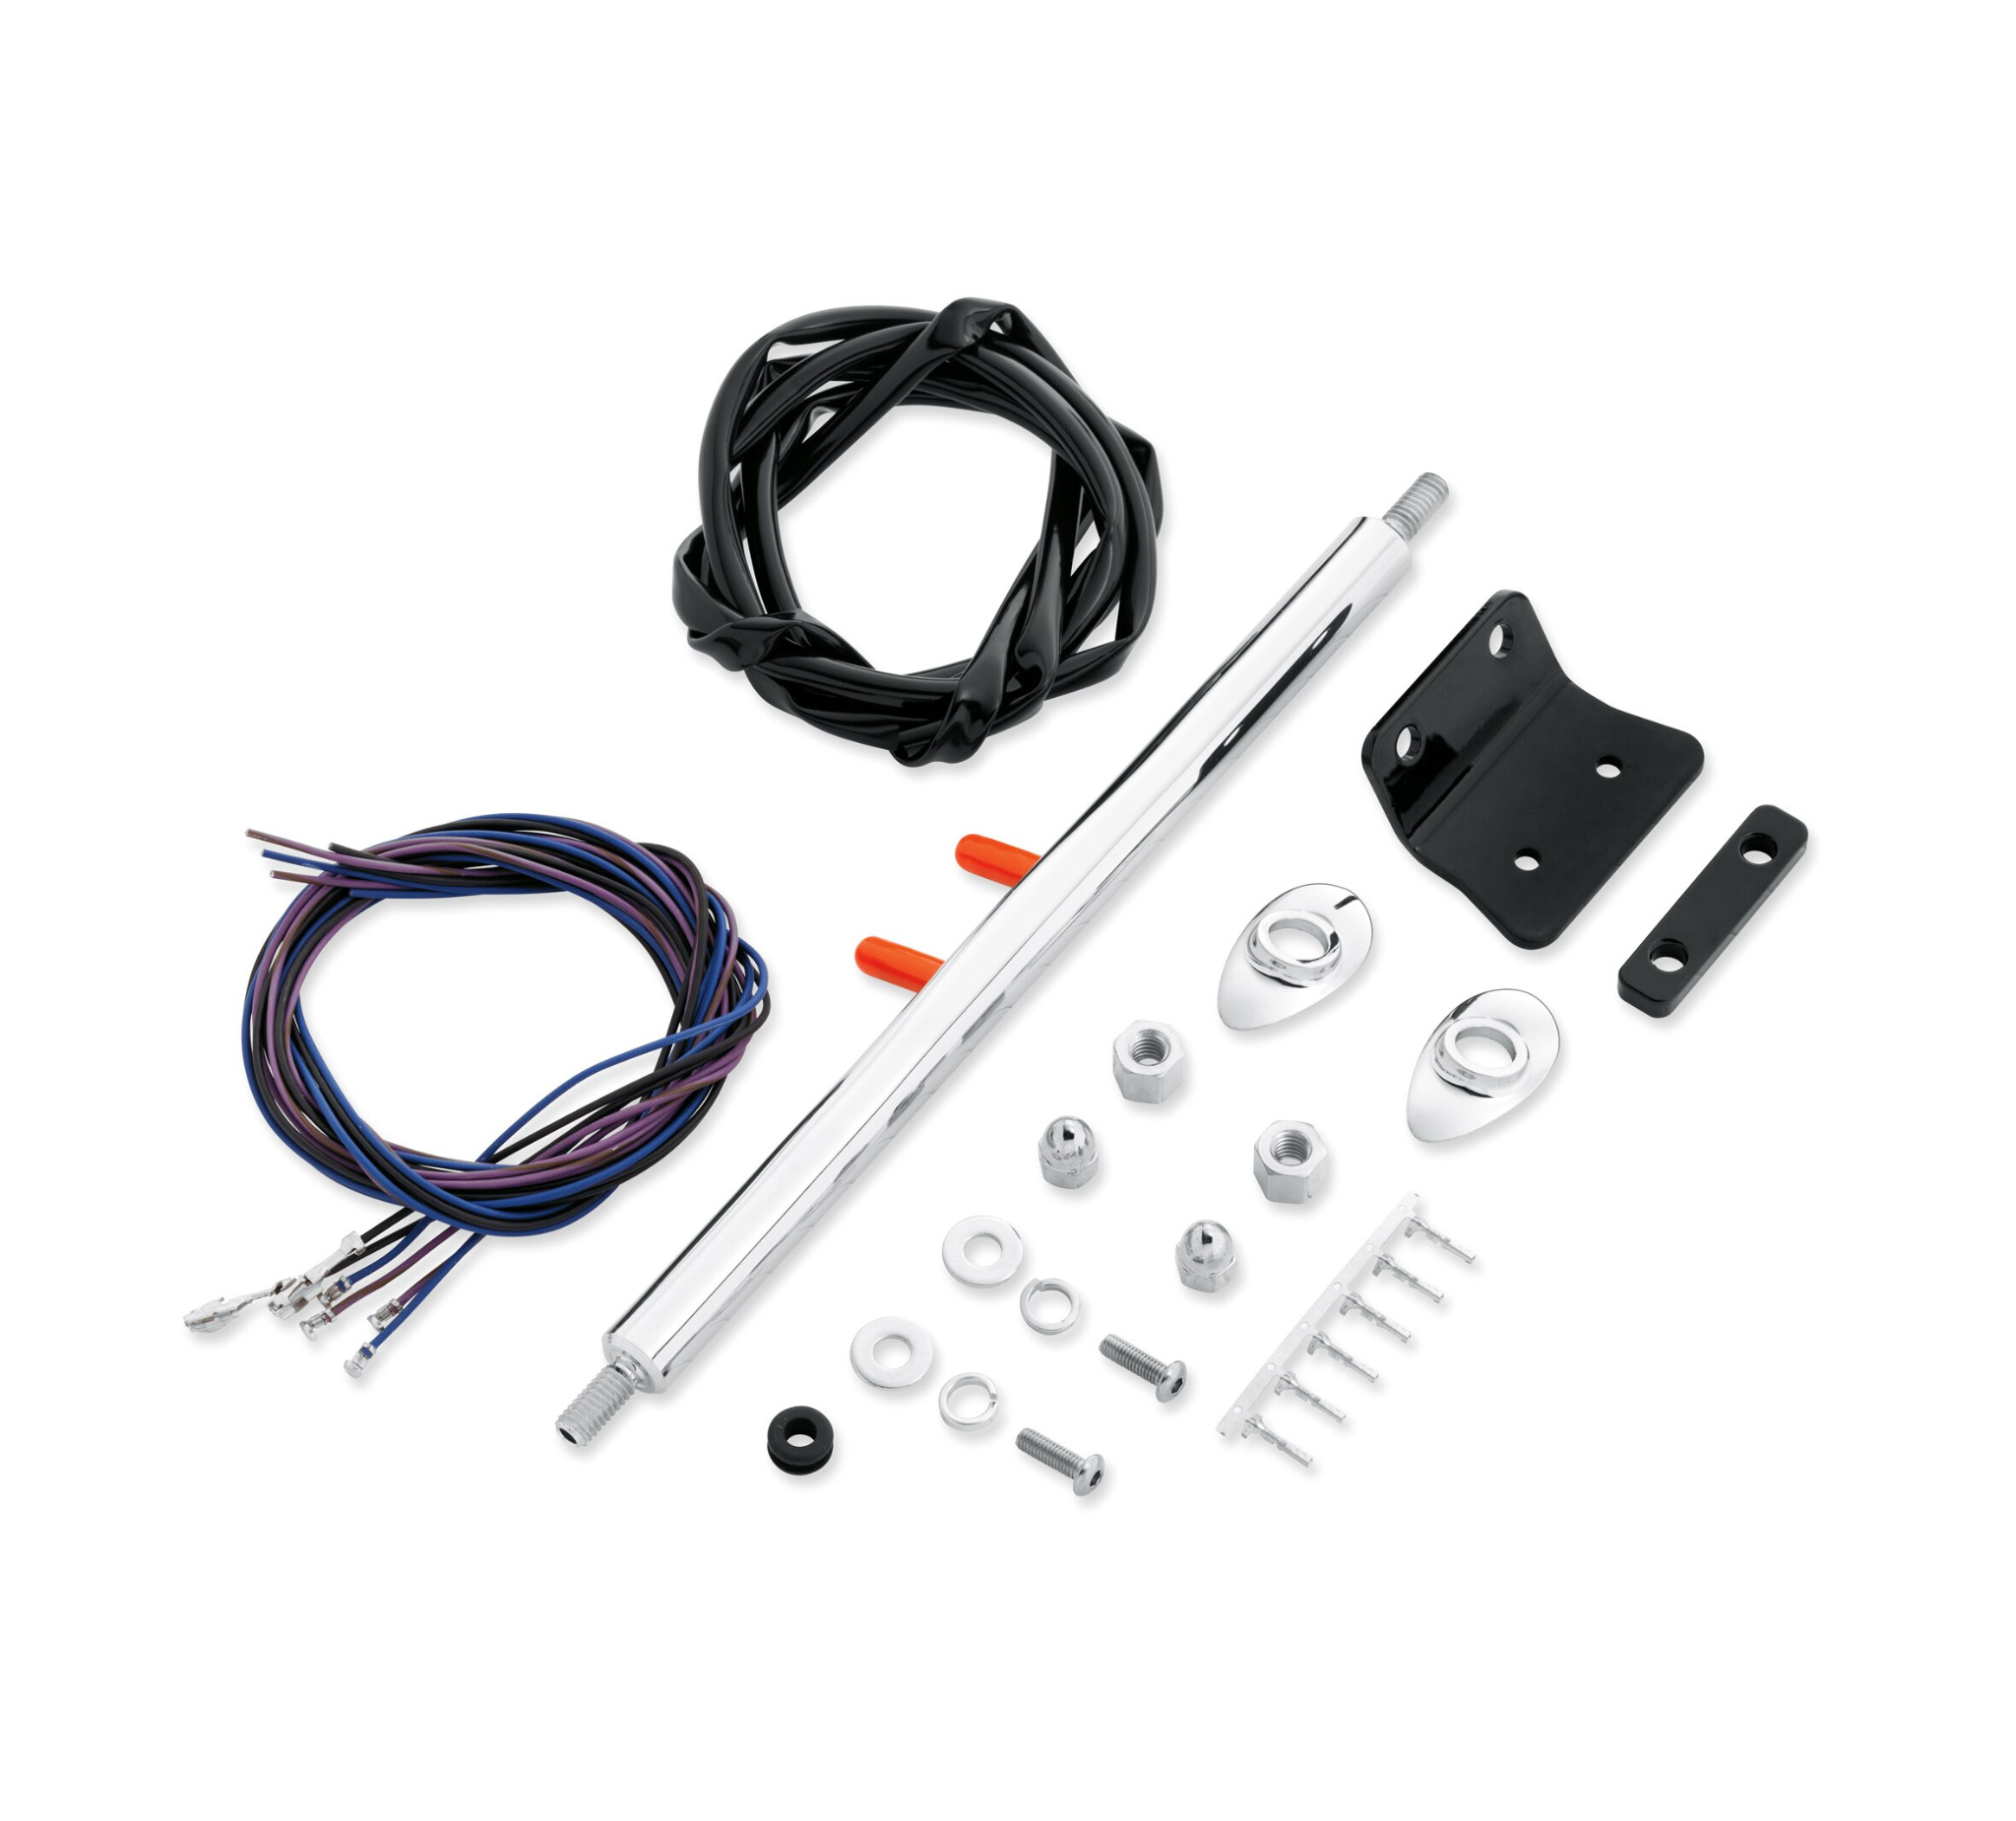 Turn Signal Relocation kit for Harley-Davidson Sportsters Black - Great Bike Gear See details for specific models 